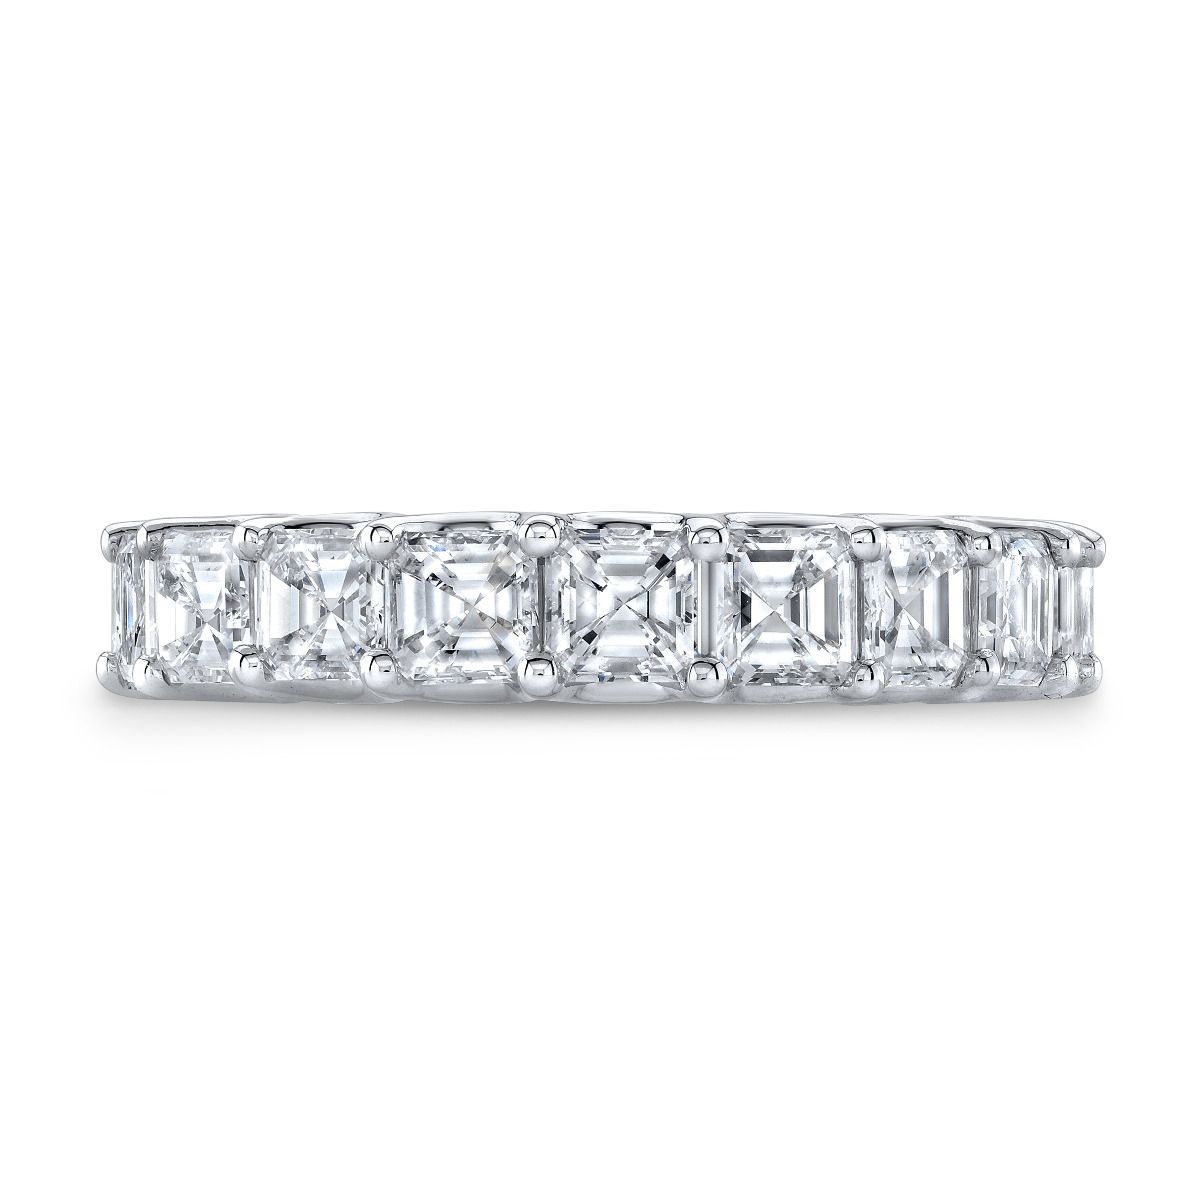 5 Carats of Asscher Diamonds that goes all the way around.